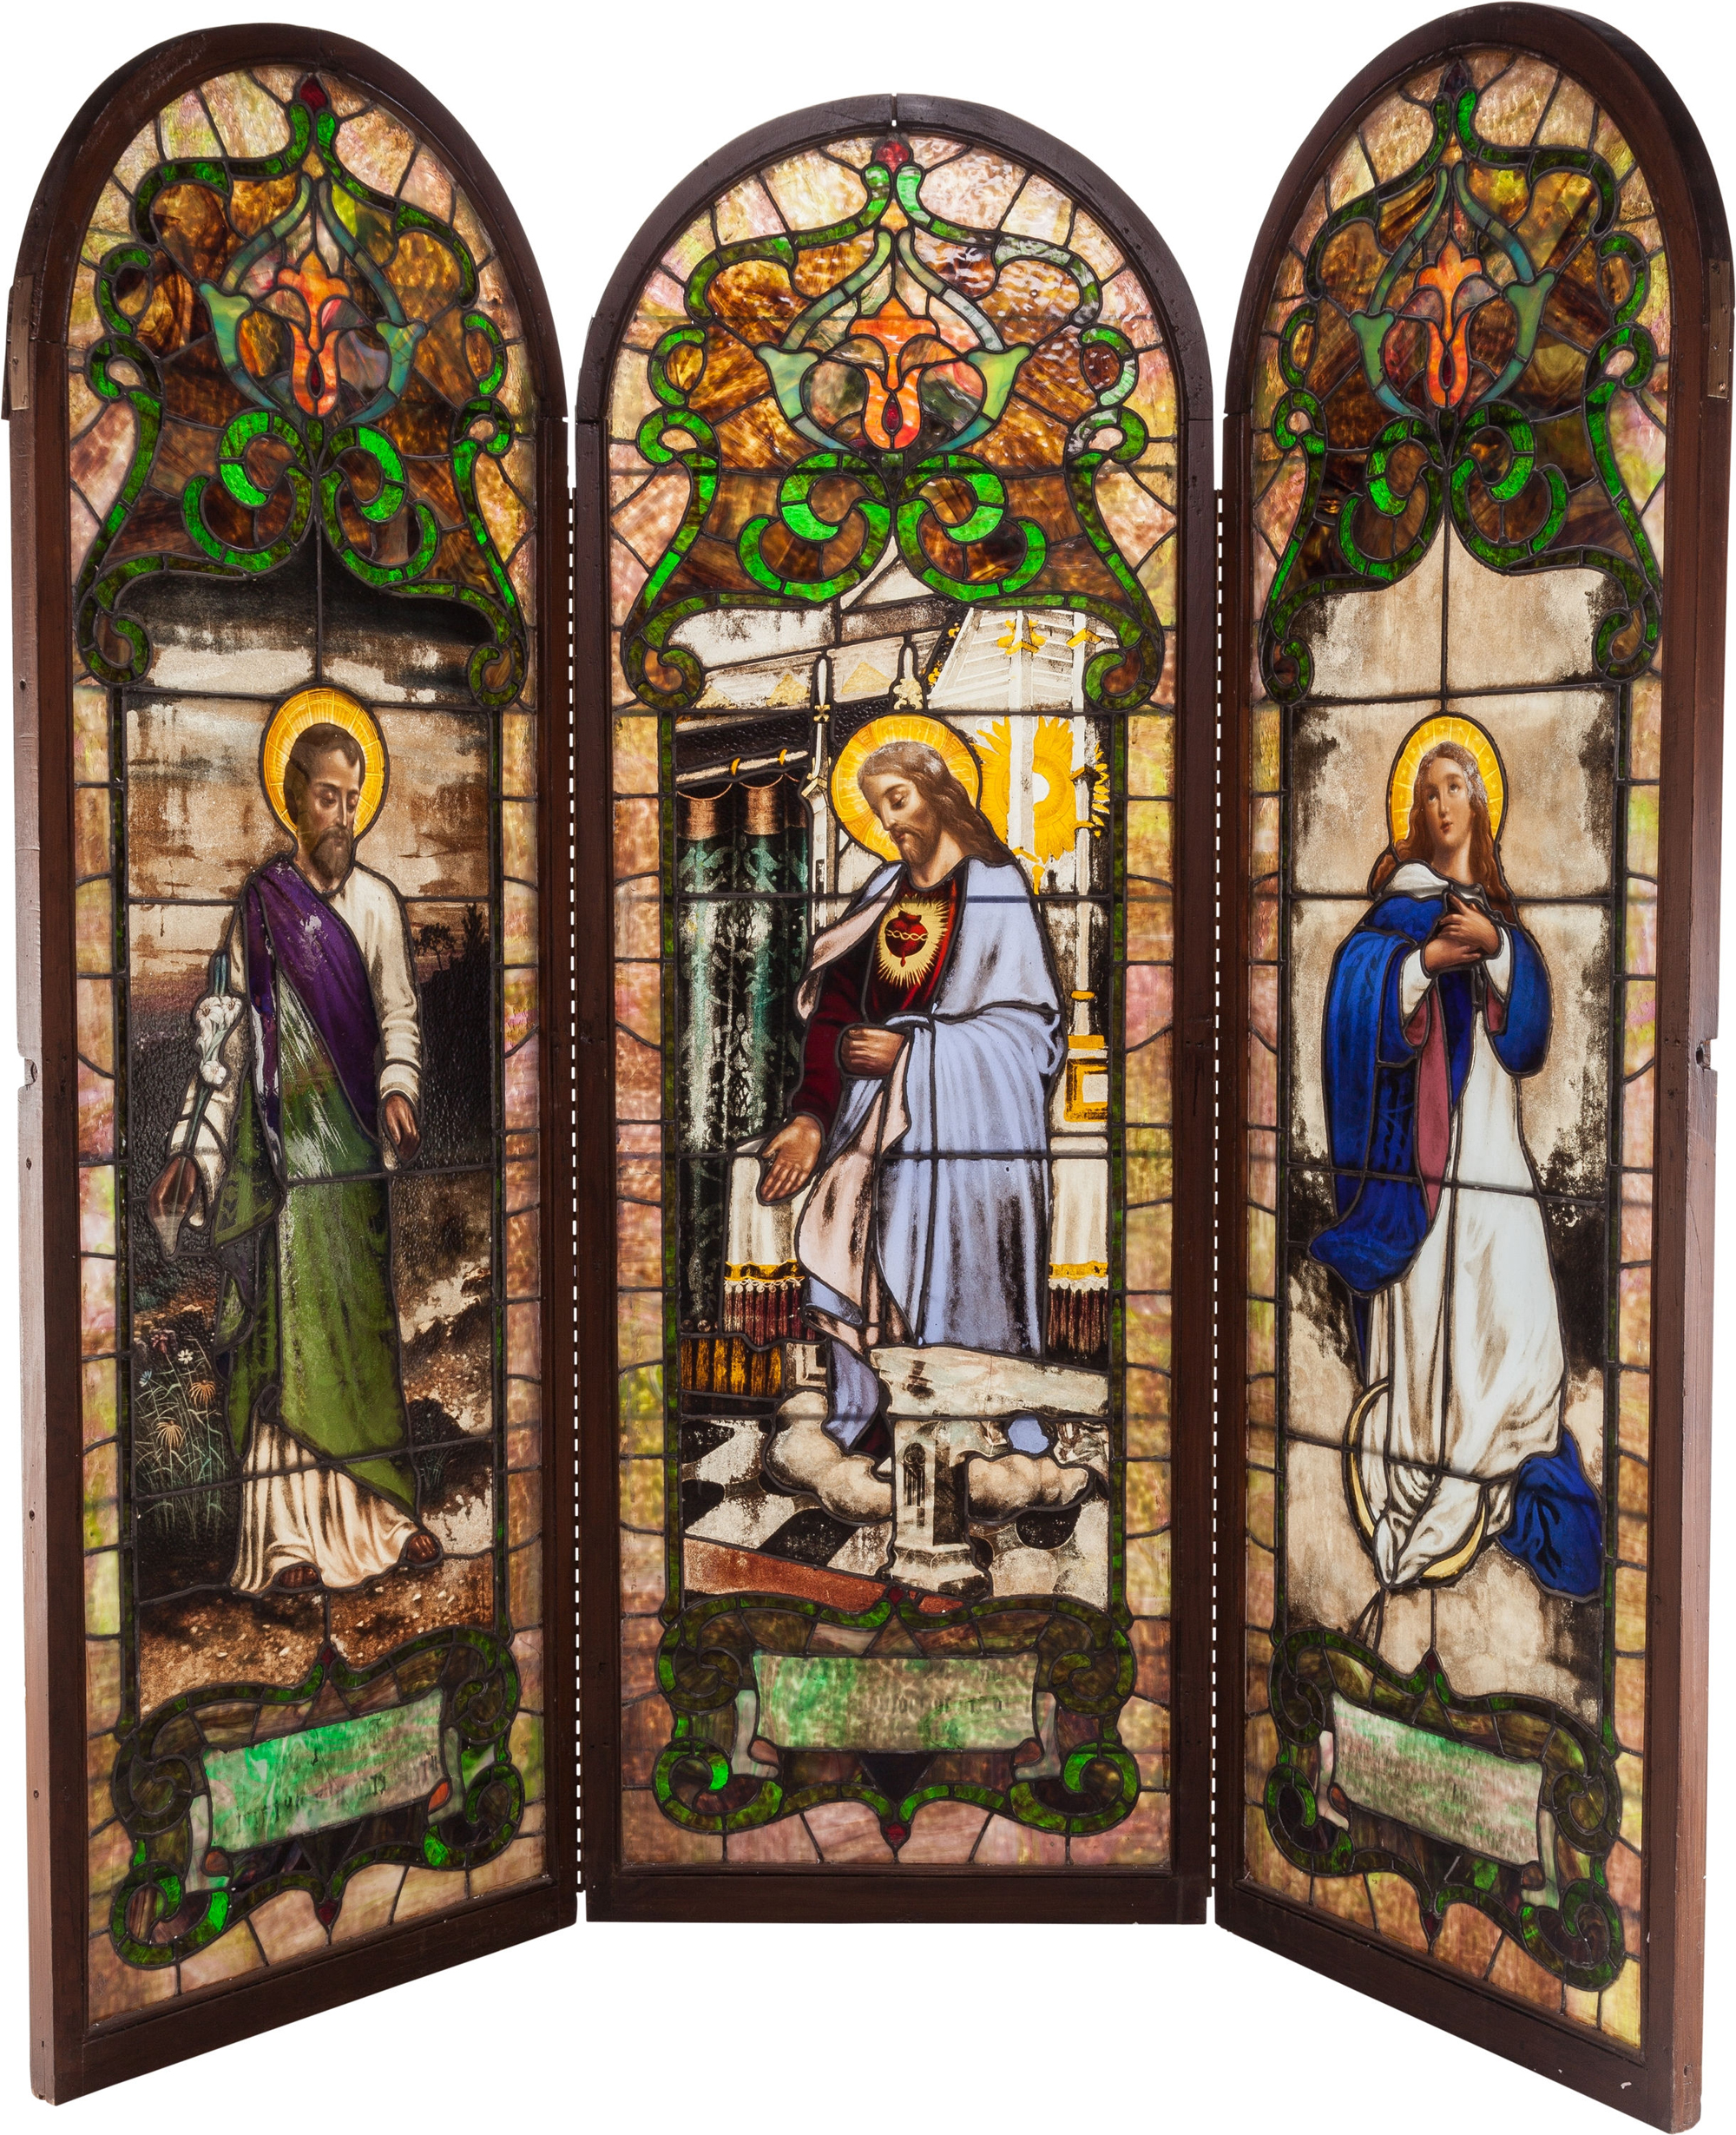 From the home of the late Rod McKuen, a German stained glass window depicting Jesus, Mary and Joseph (est. $10,000+). Heritage Auctions image